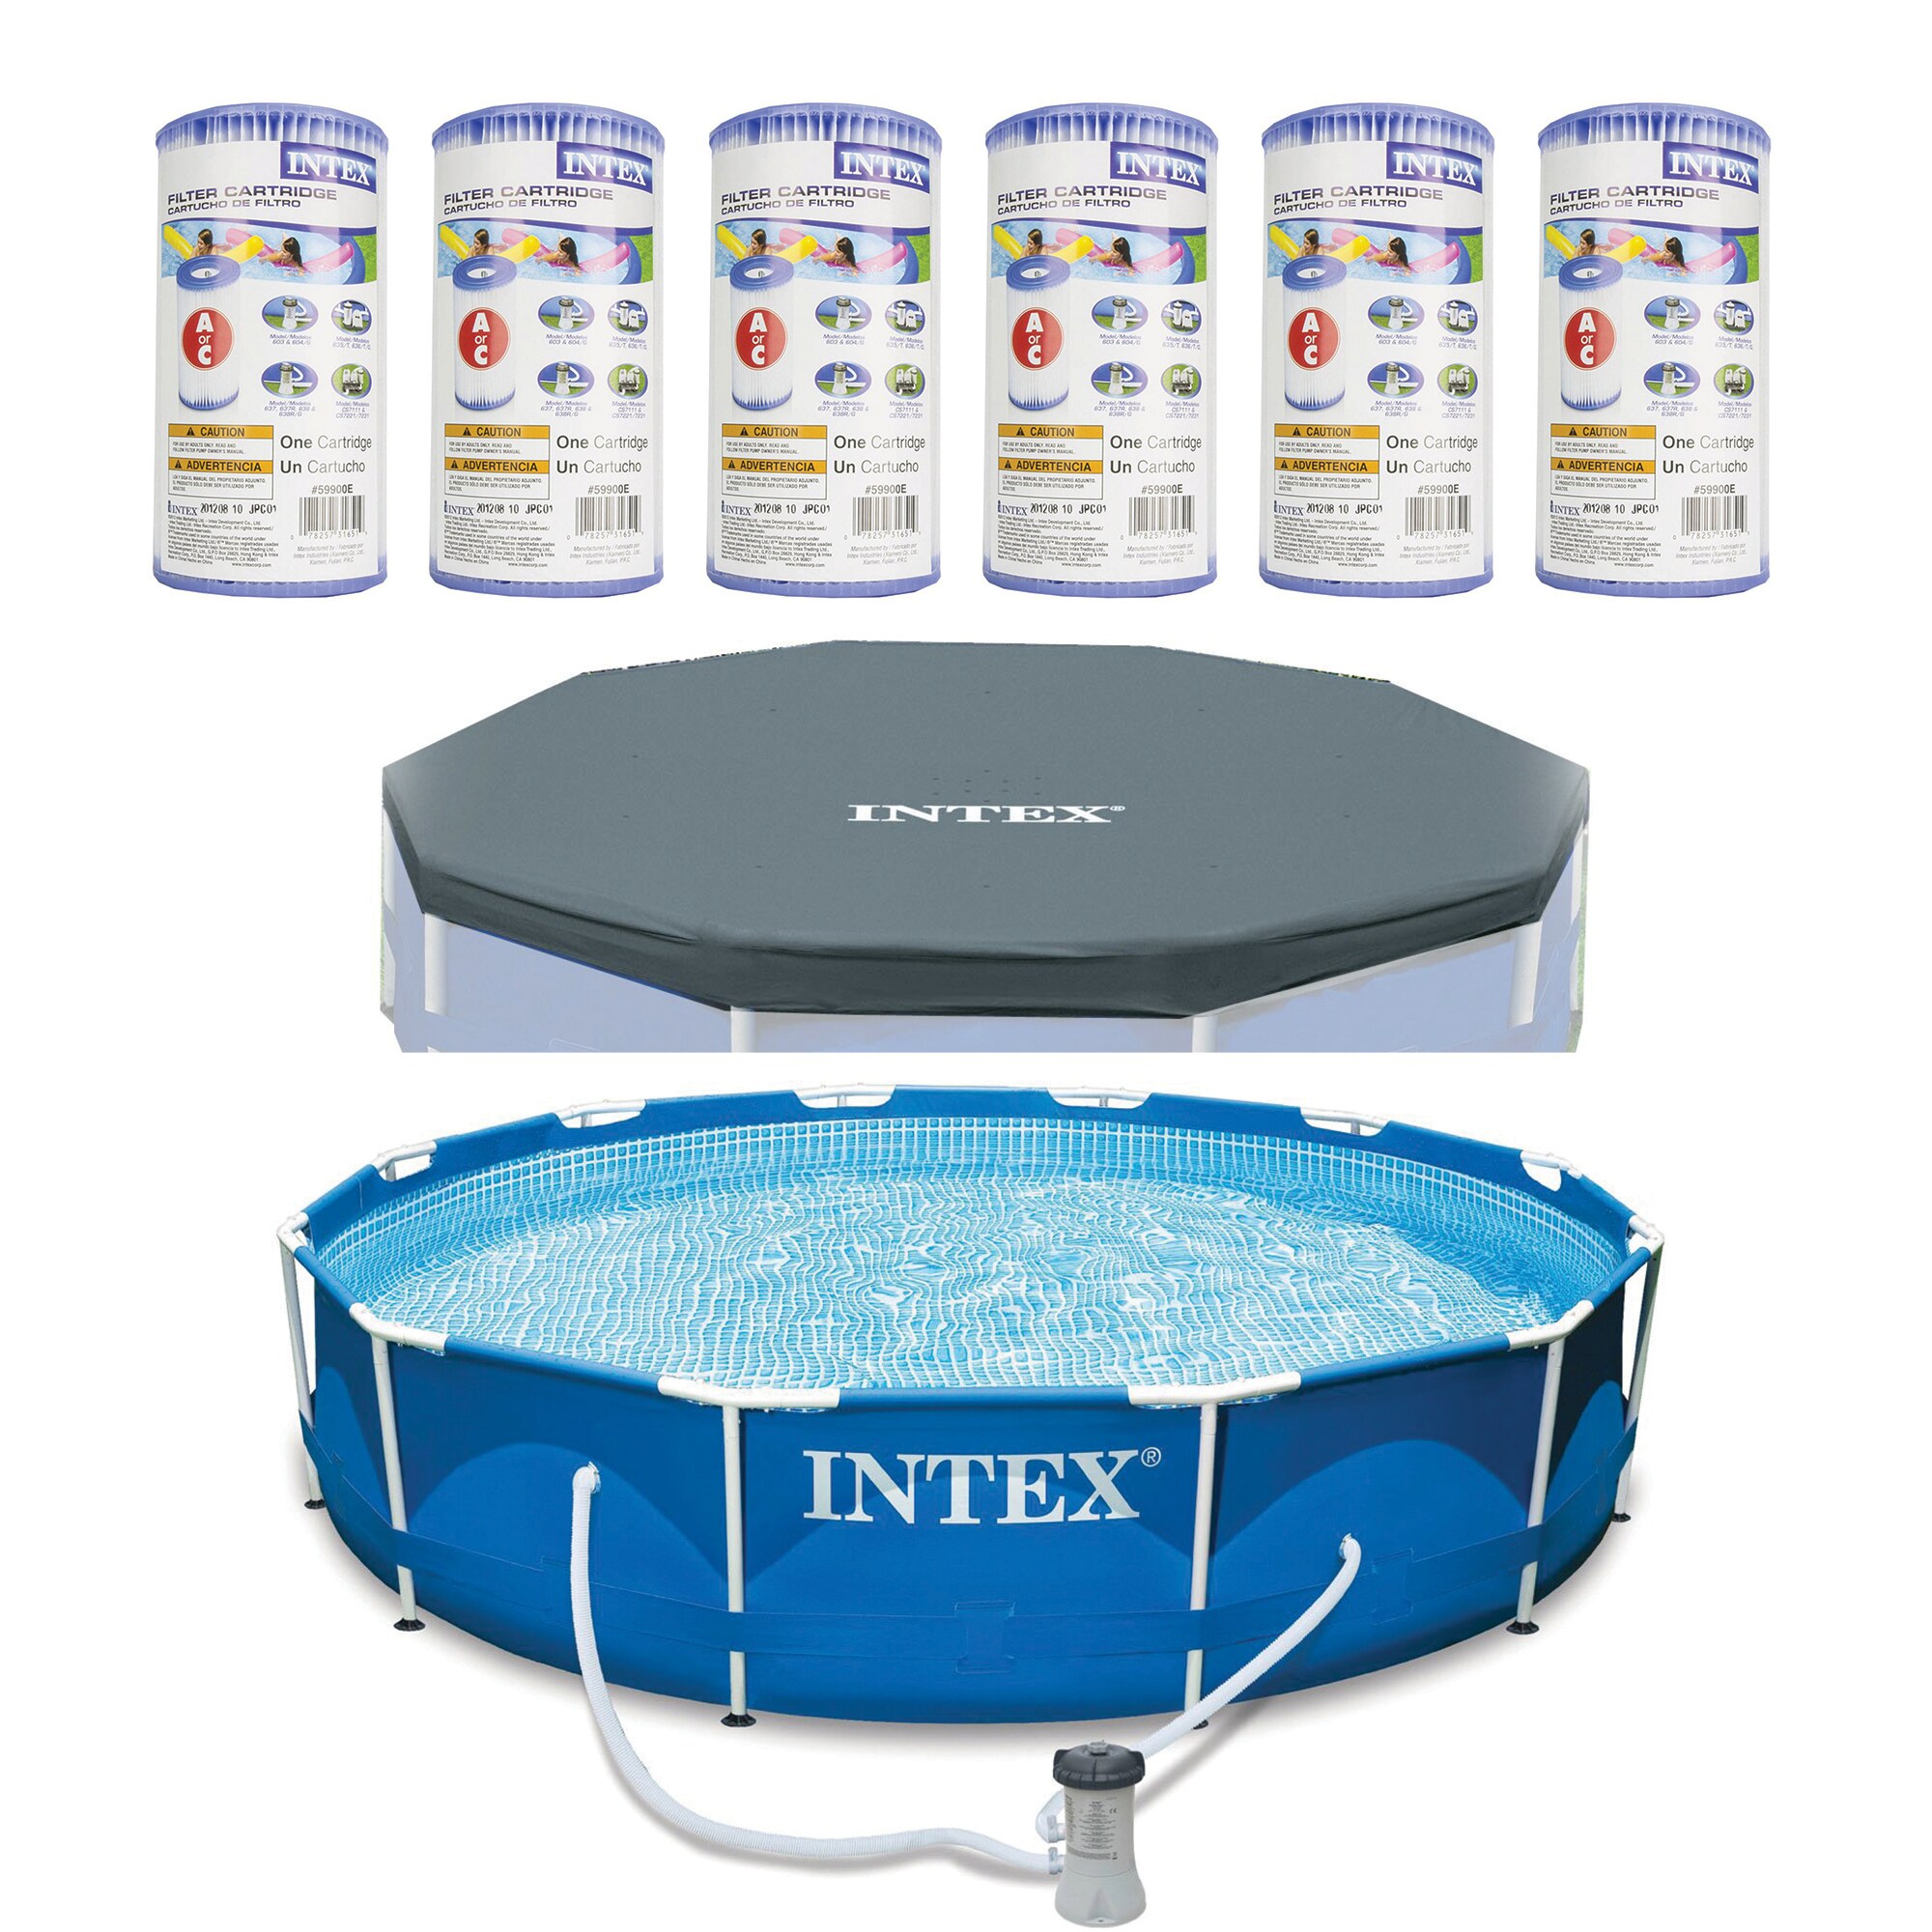 Intex 12-ft x 30-in Round Above-Ground Pool in the Above-Ground department at Lowes.com